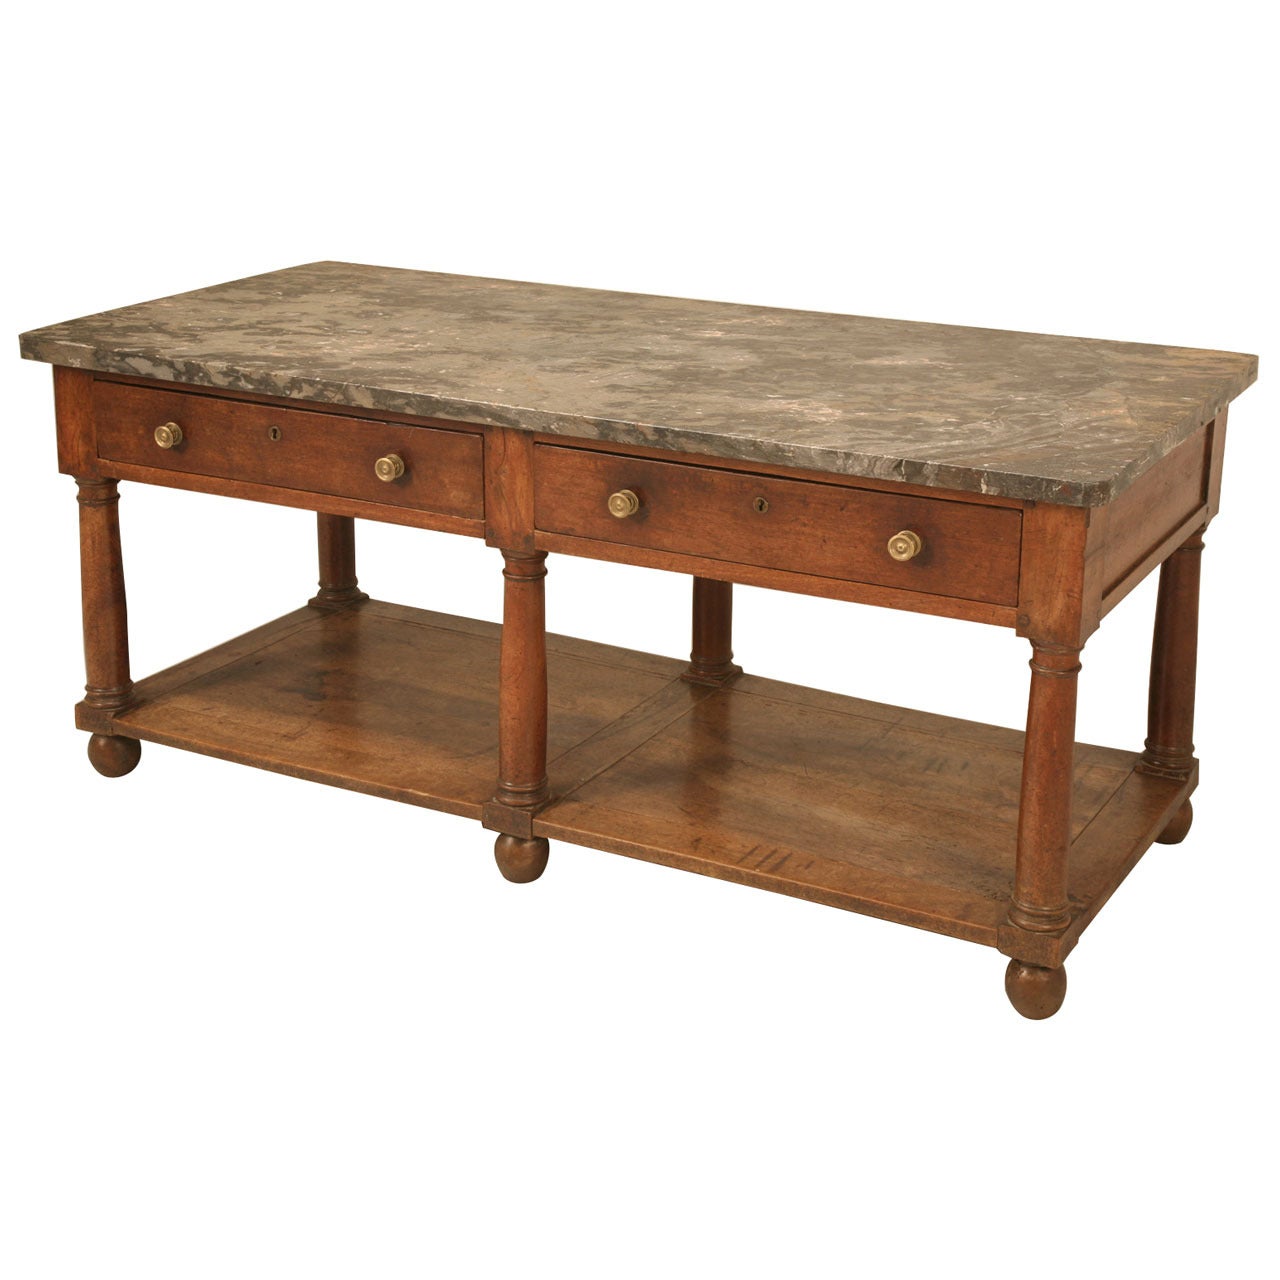 Circa 1810 Unrestored Antique French Empire 2 Drawer Mahogany Table with Shelf and Marble Top